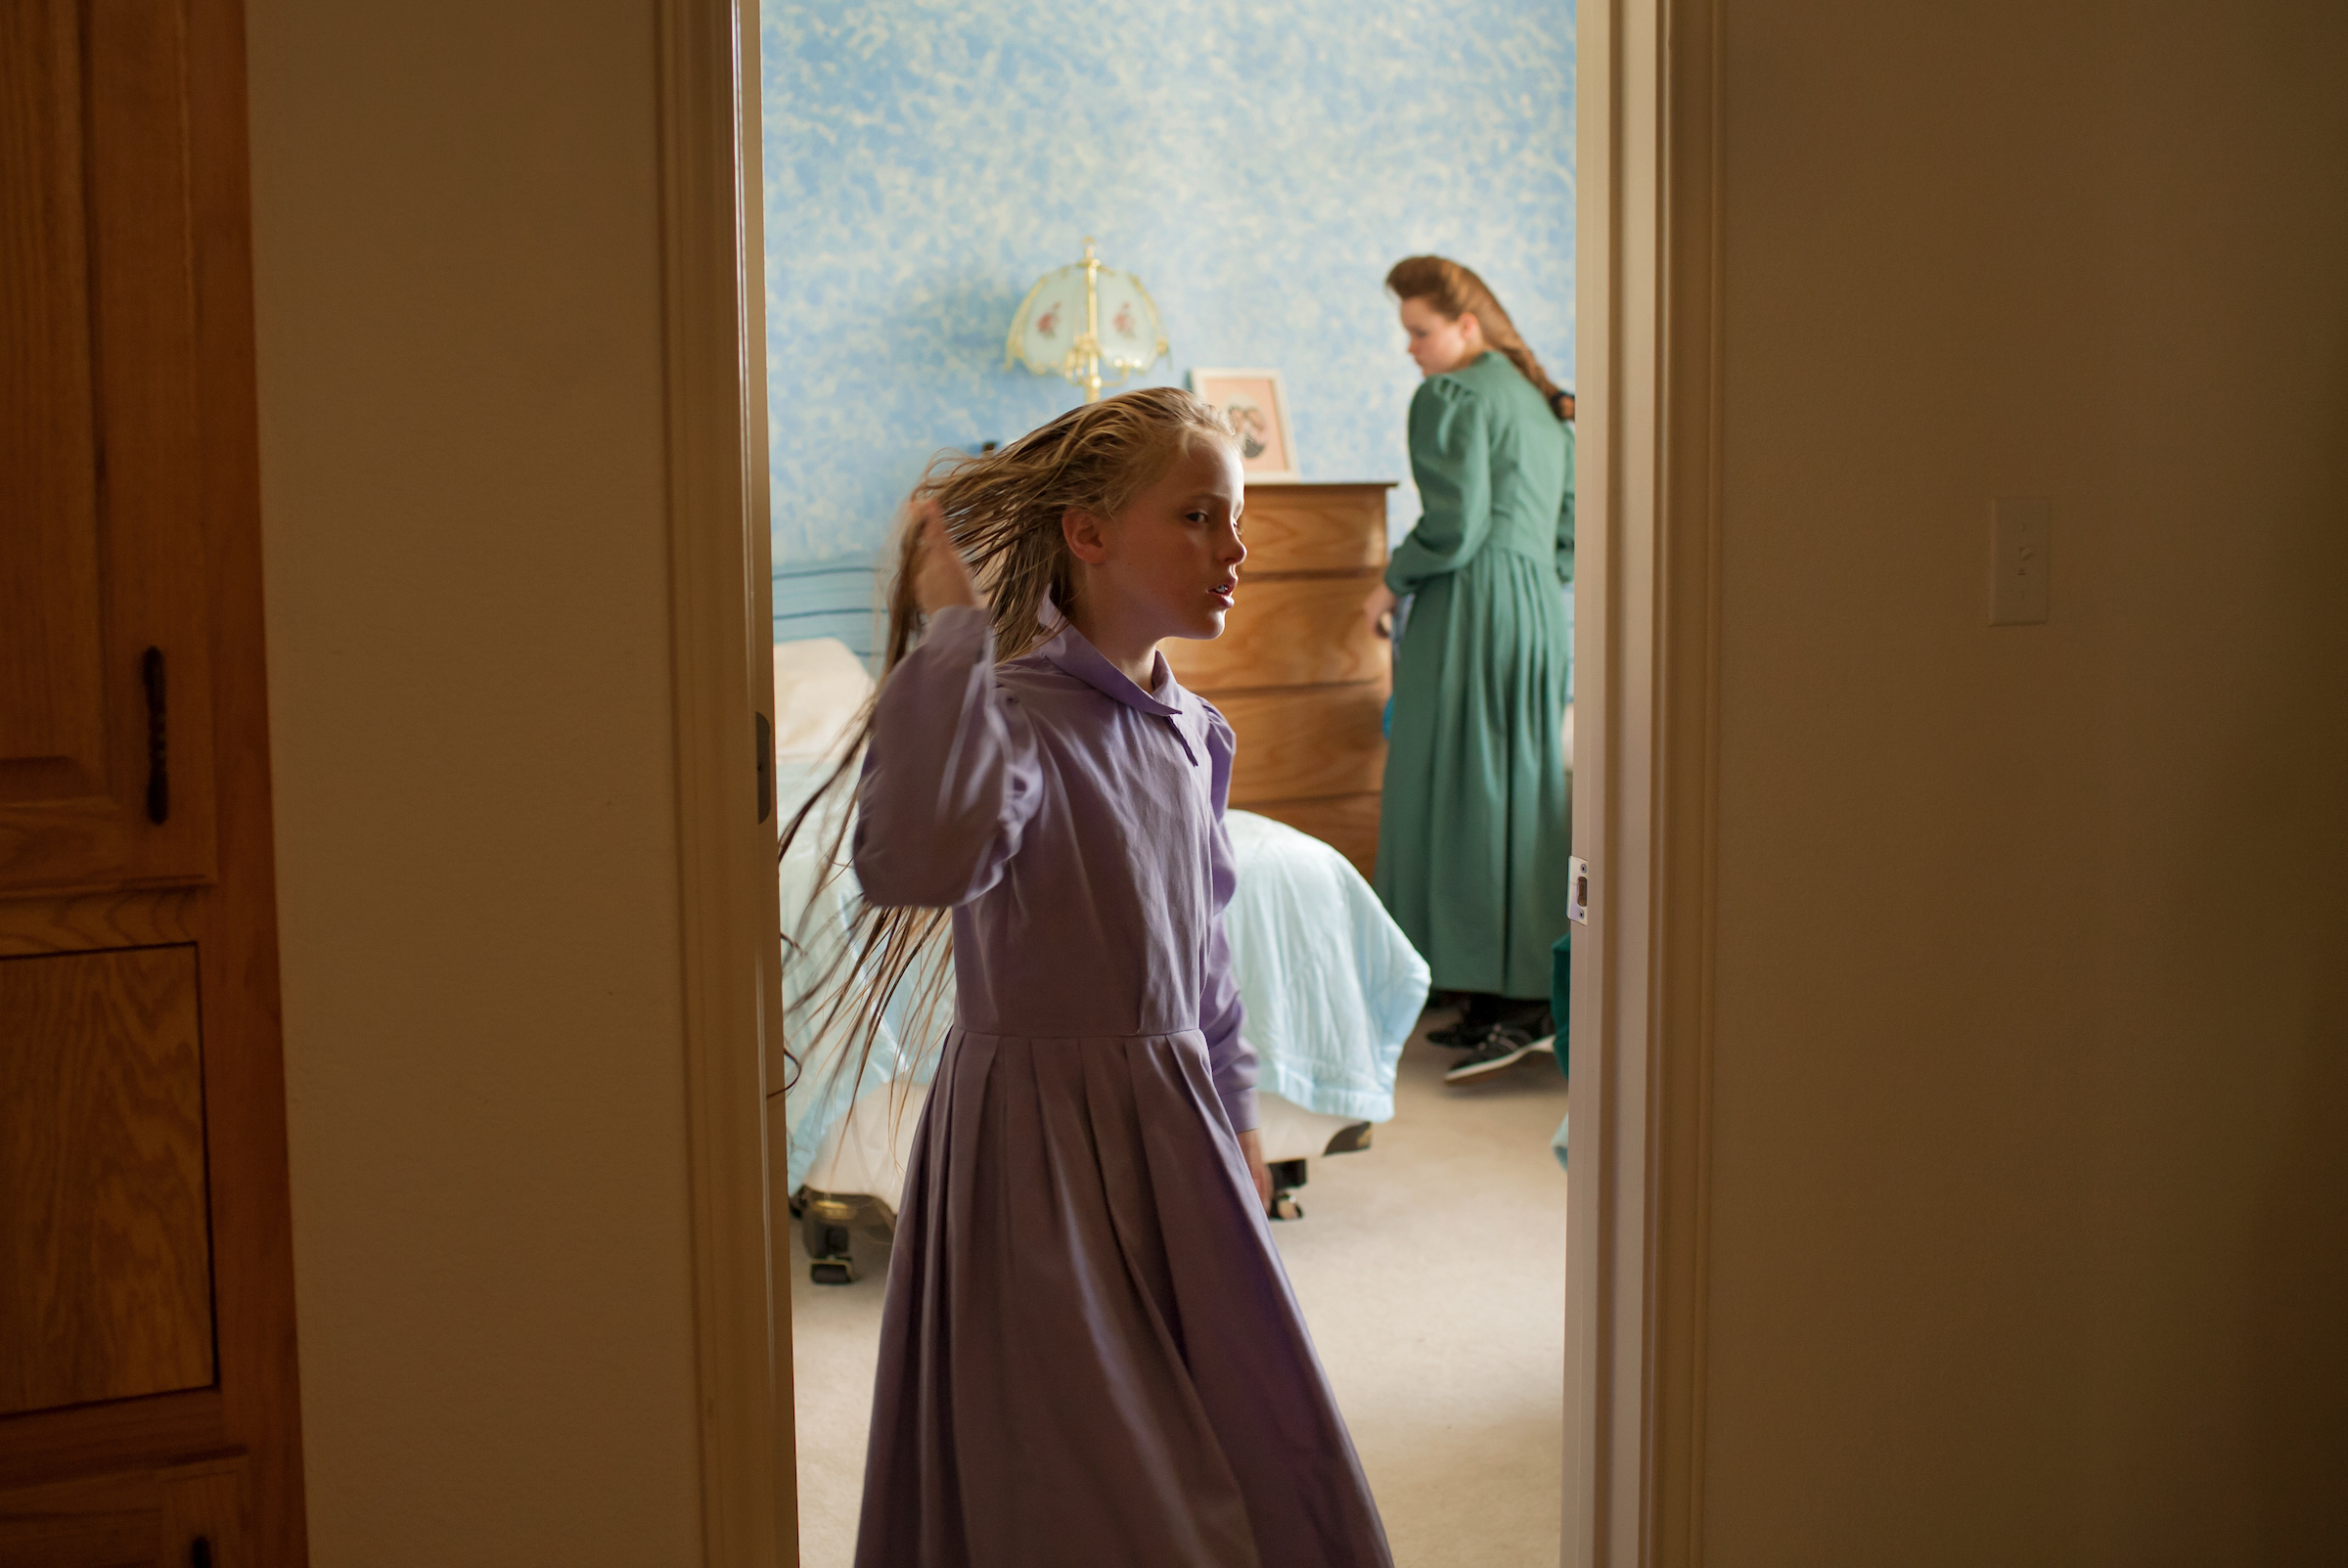 Children of Warren F. Jeffs take refuge from authorities in a Texas rented home after the raid.